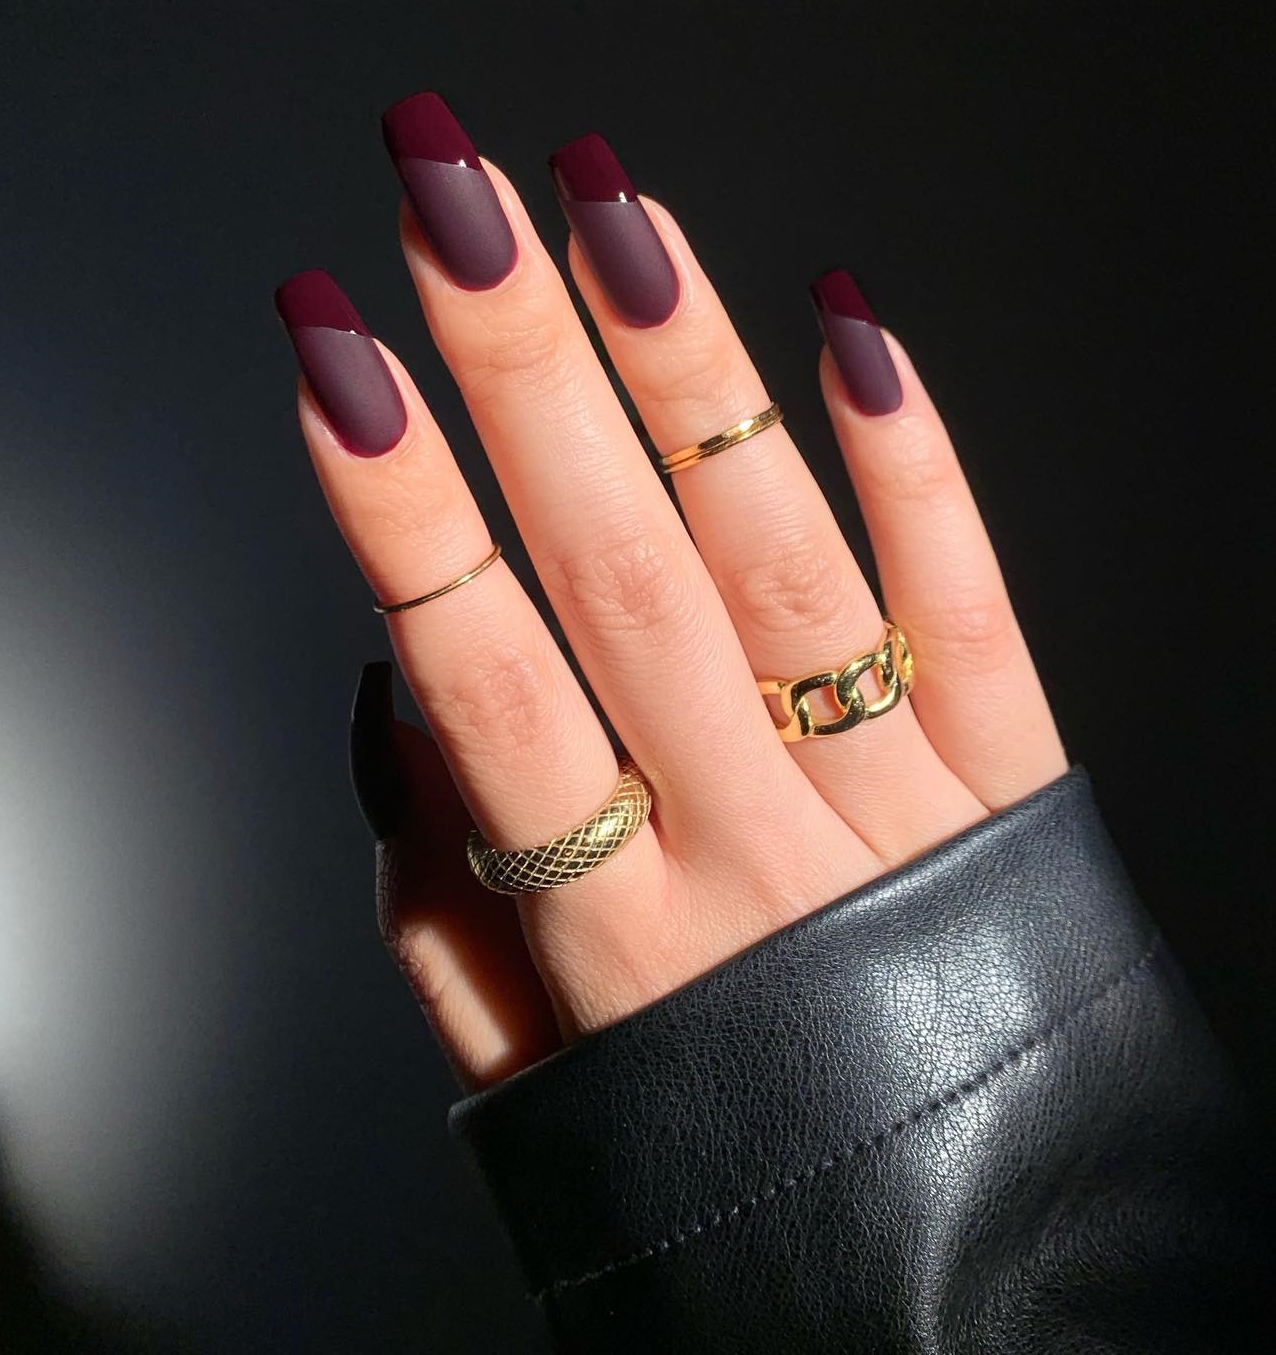 Long Round Matte Burgundy Nails with Glossy Tips